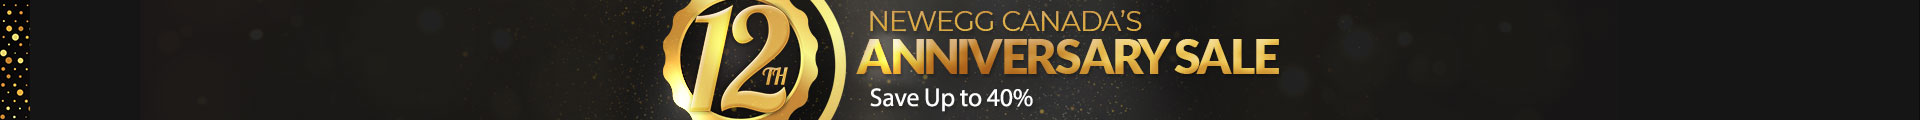 Newegg Canada’s 12th Anniversary Sale Features Great Deals for Canadian Customers